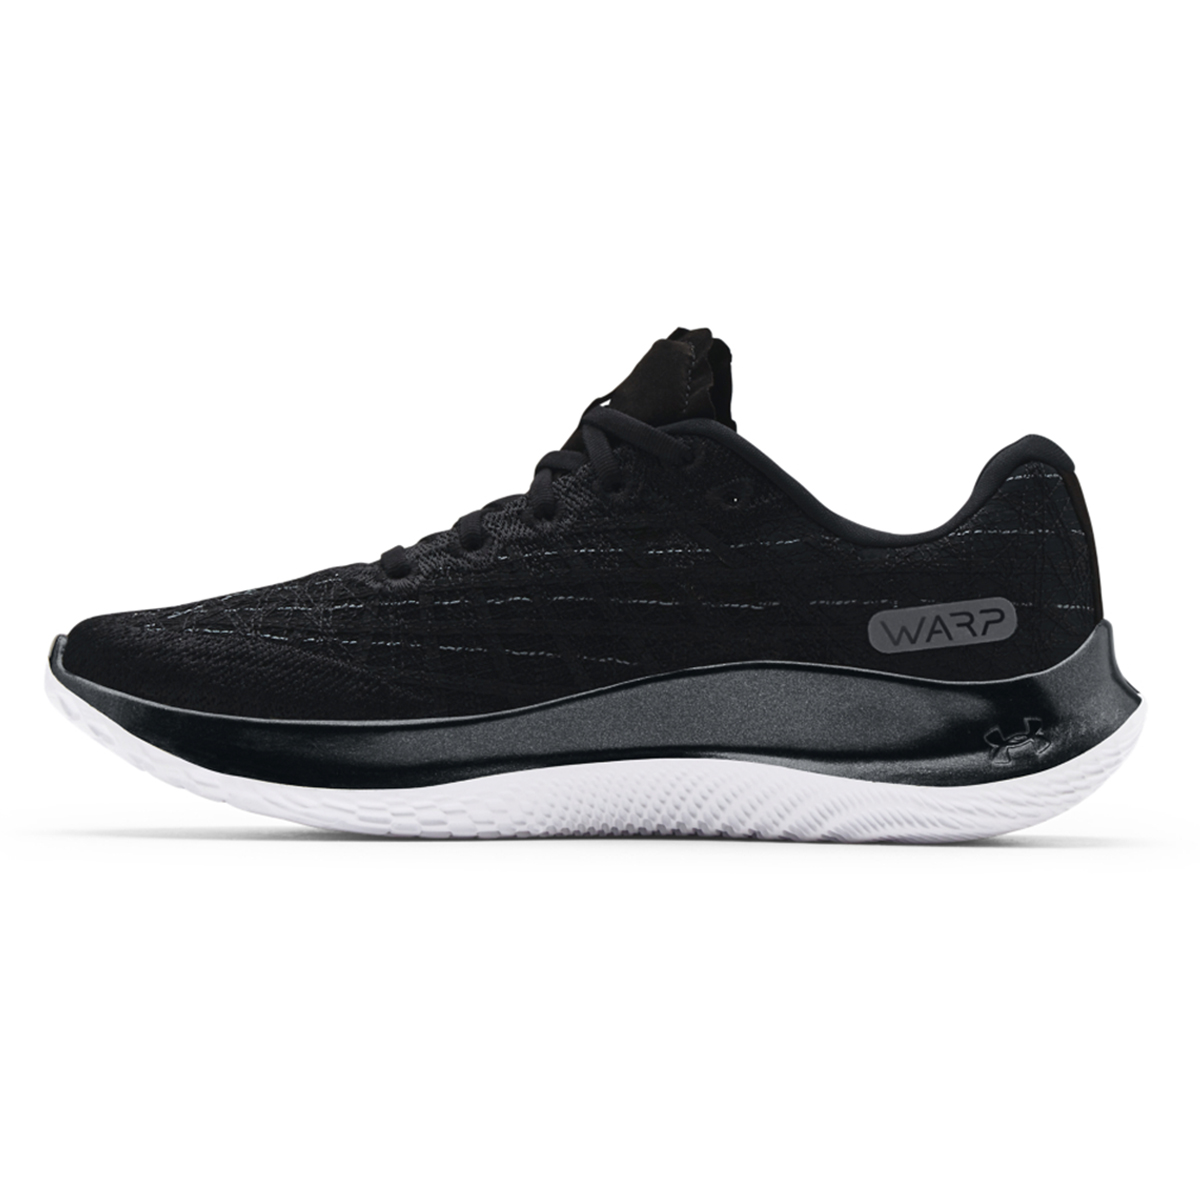 Zapatillas Under Armour Flow Velociti Wind,  image number null